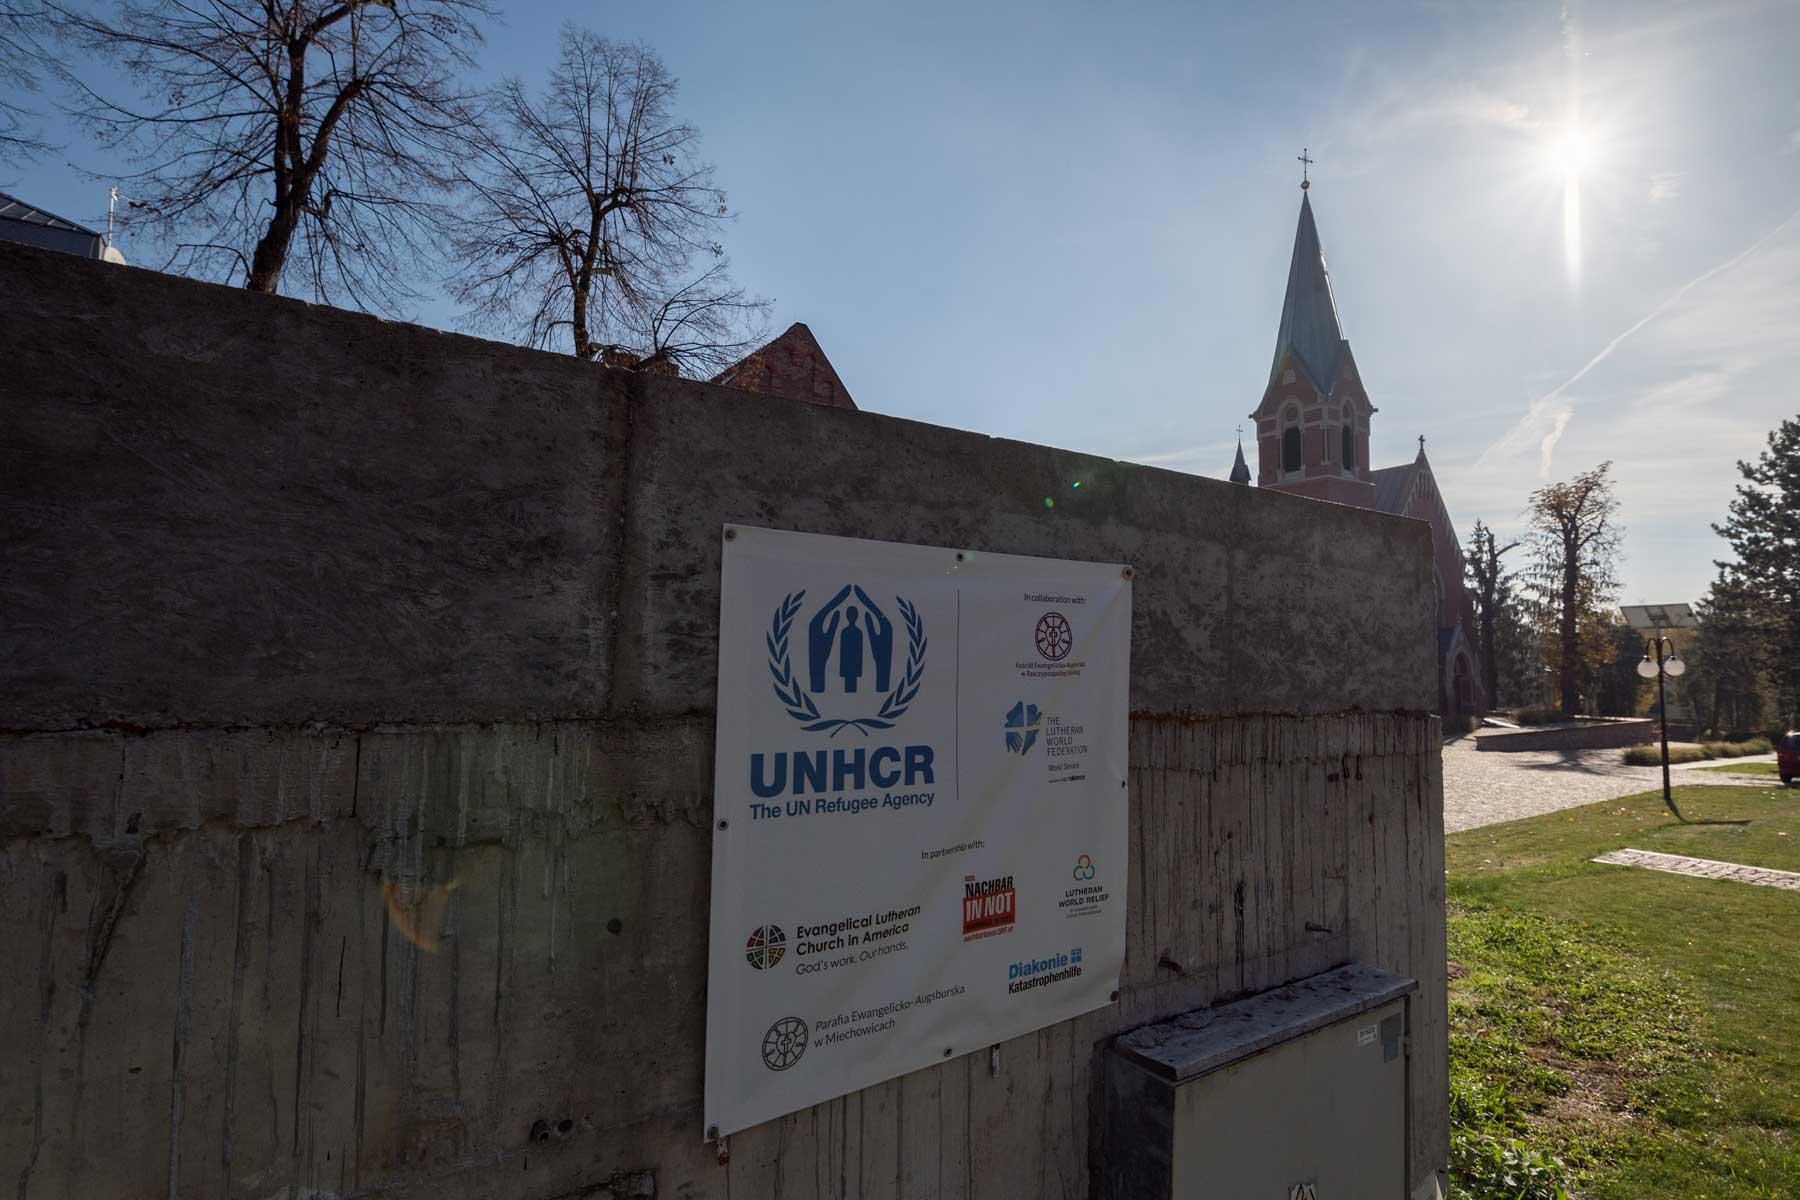 A sign leads the way towards the entrance of the LWF centre in Bytom, Poland, located at the Evangelical Church of the Augsburg Confession in Poland parish in Bytom. Photo: LWF/Albin Hillert